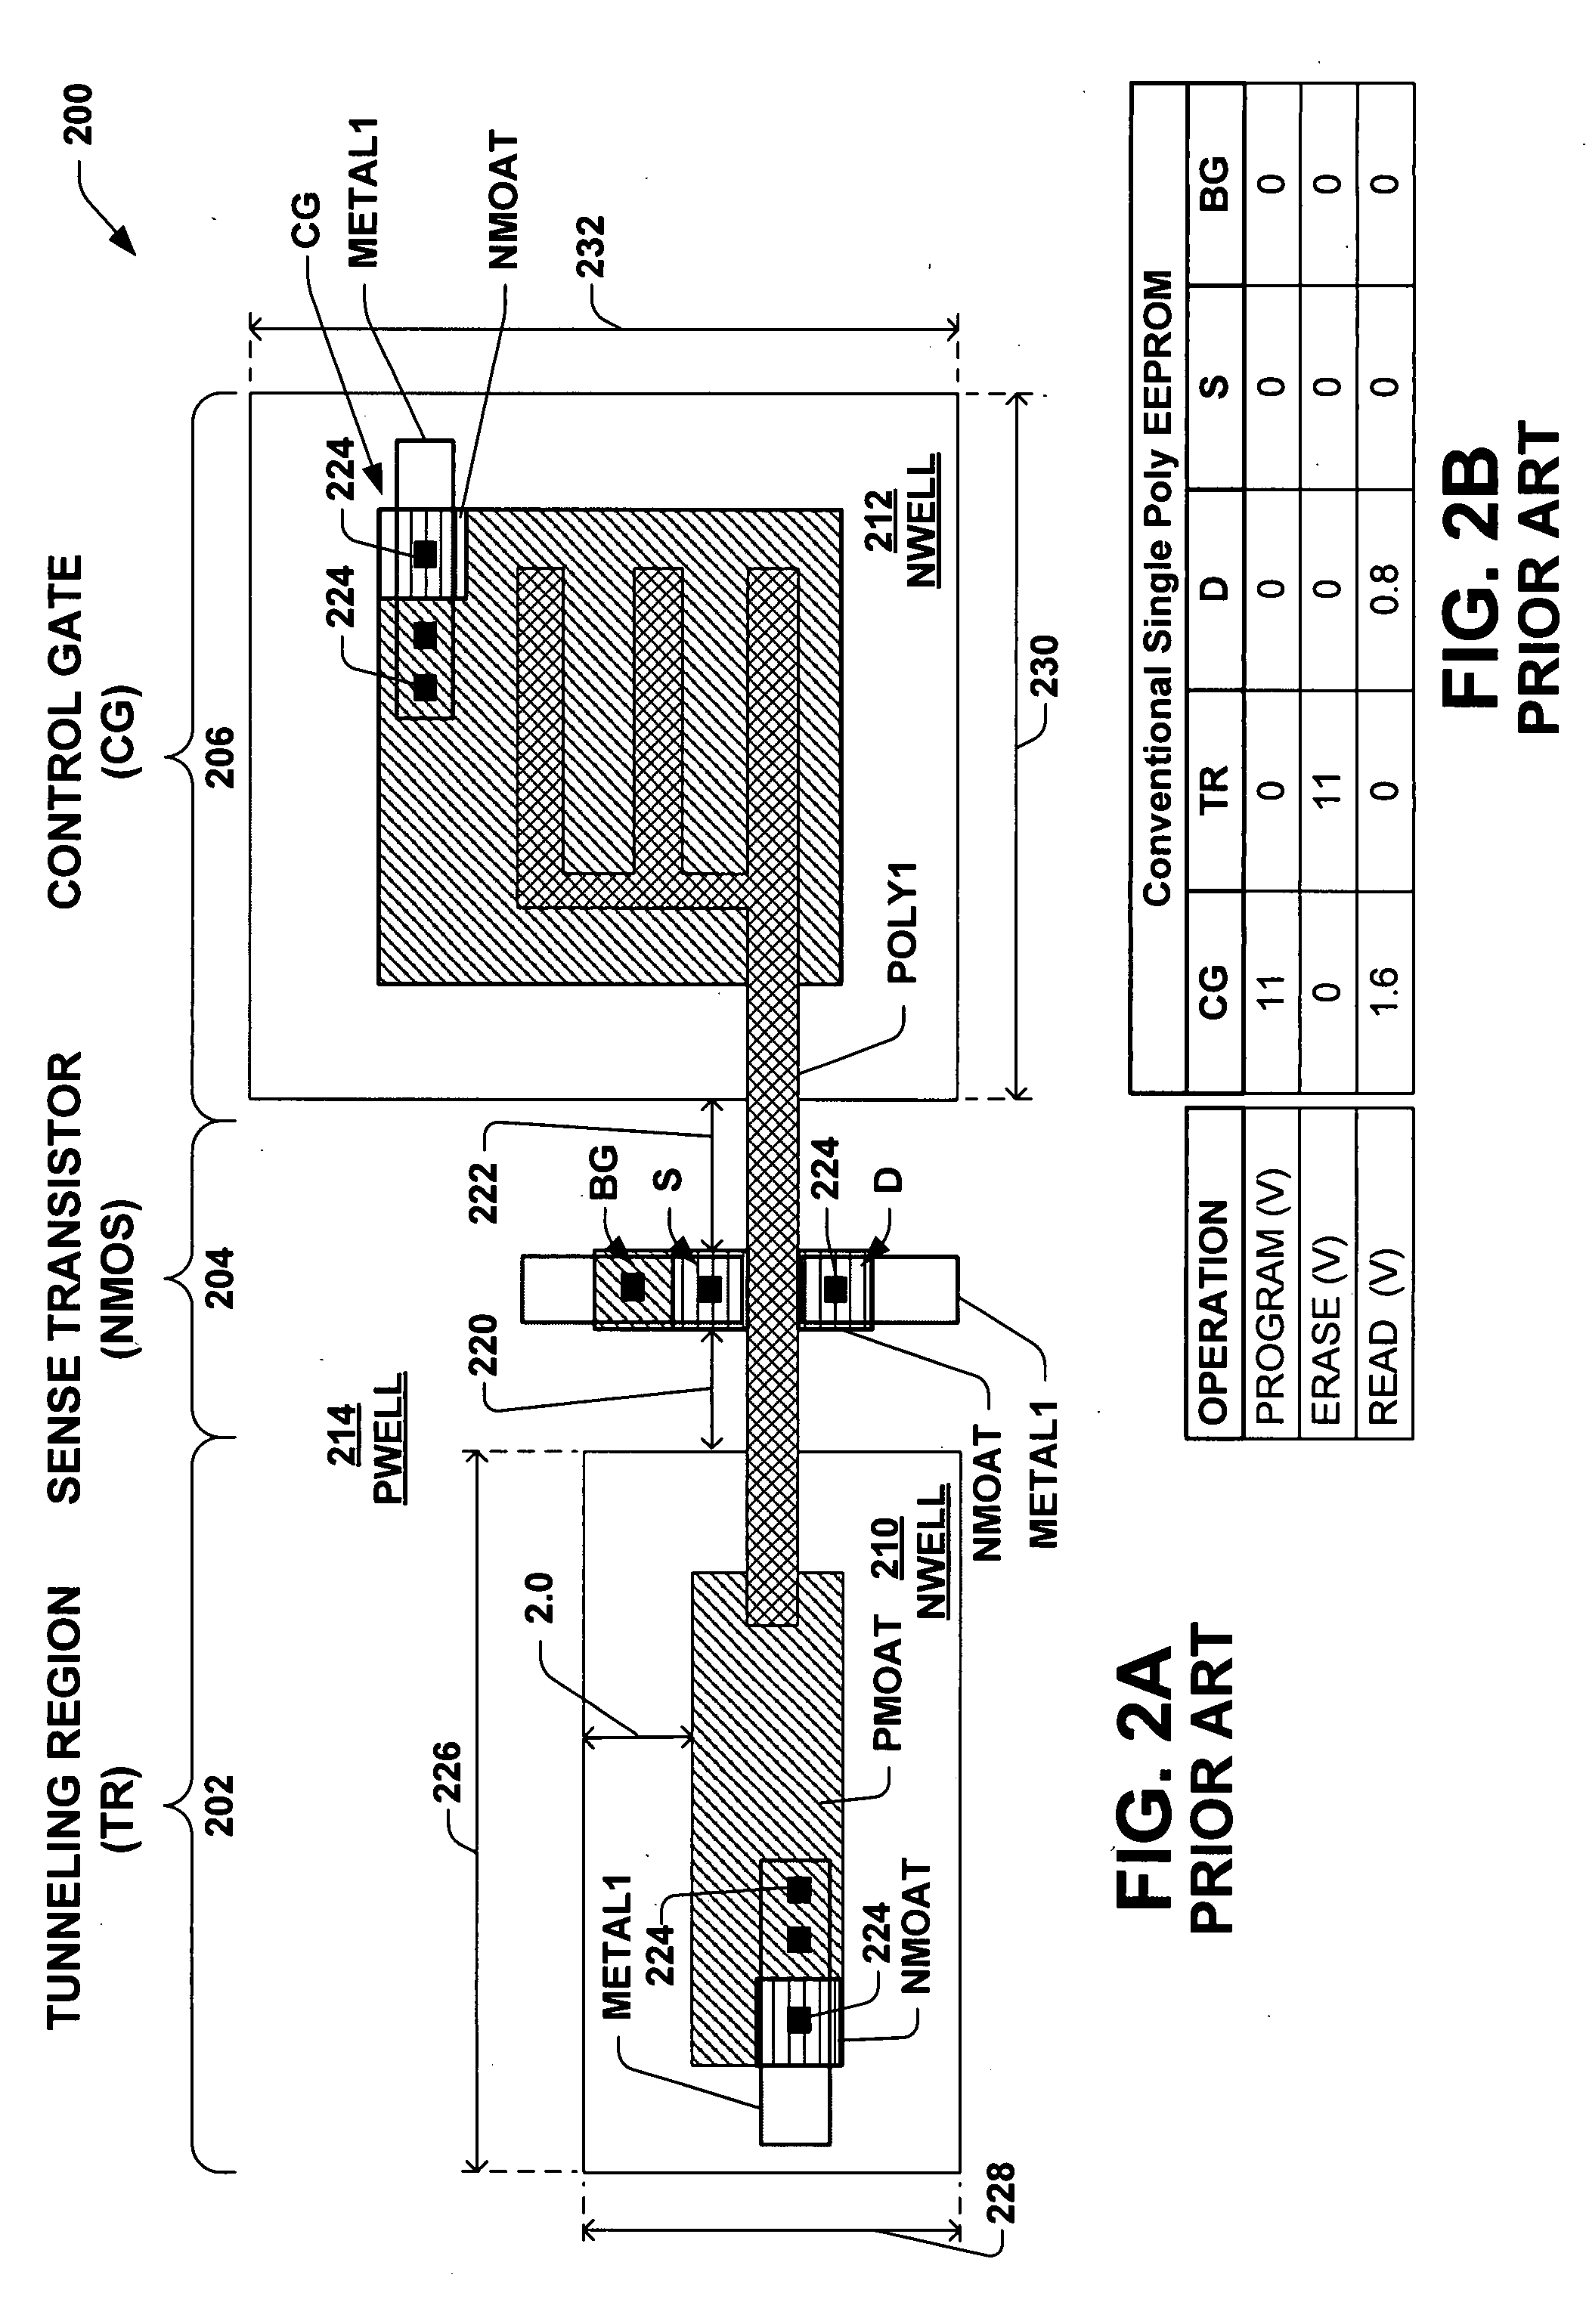 Single poly EEPROM without separate control gate nor erase regions